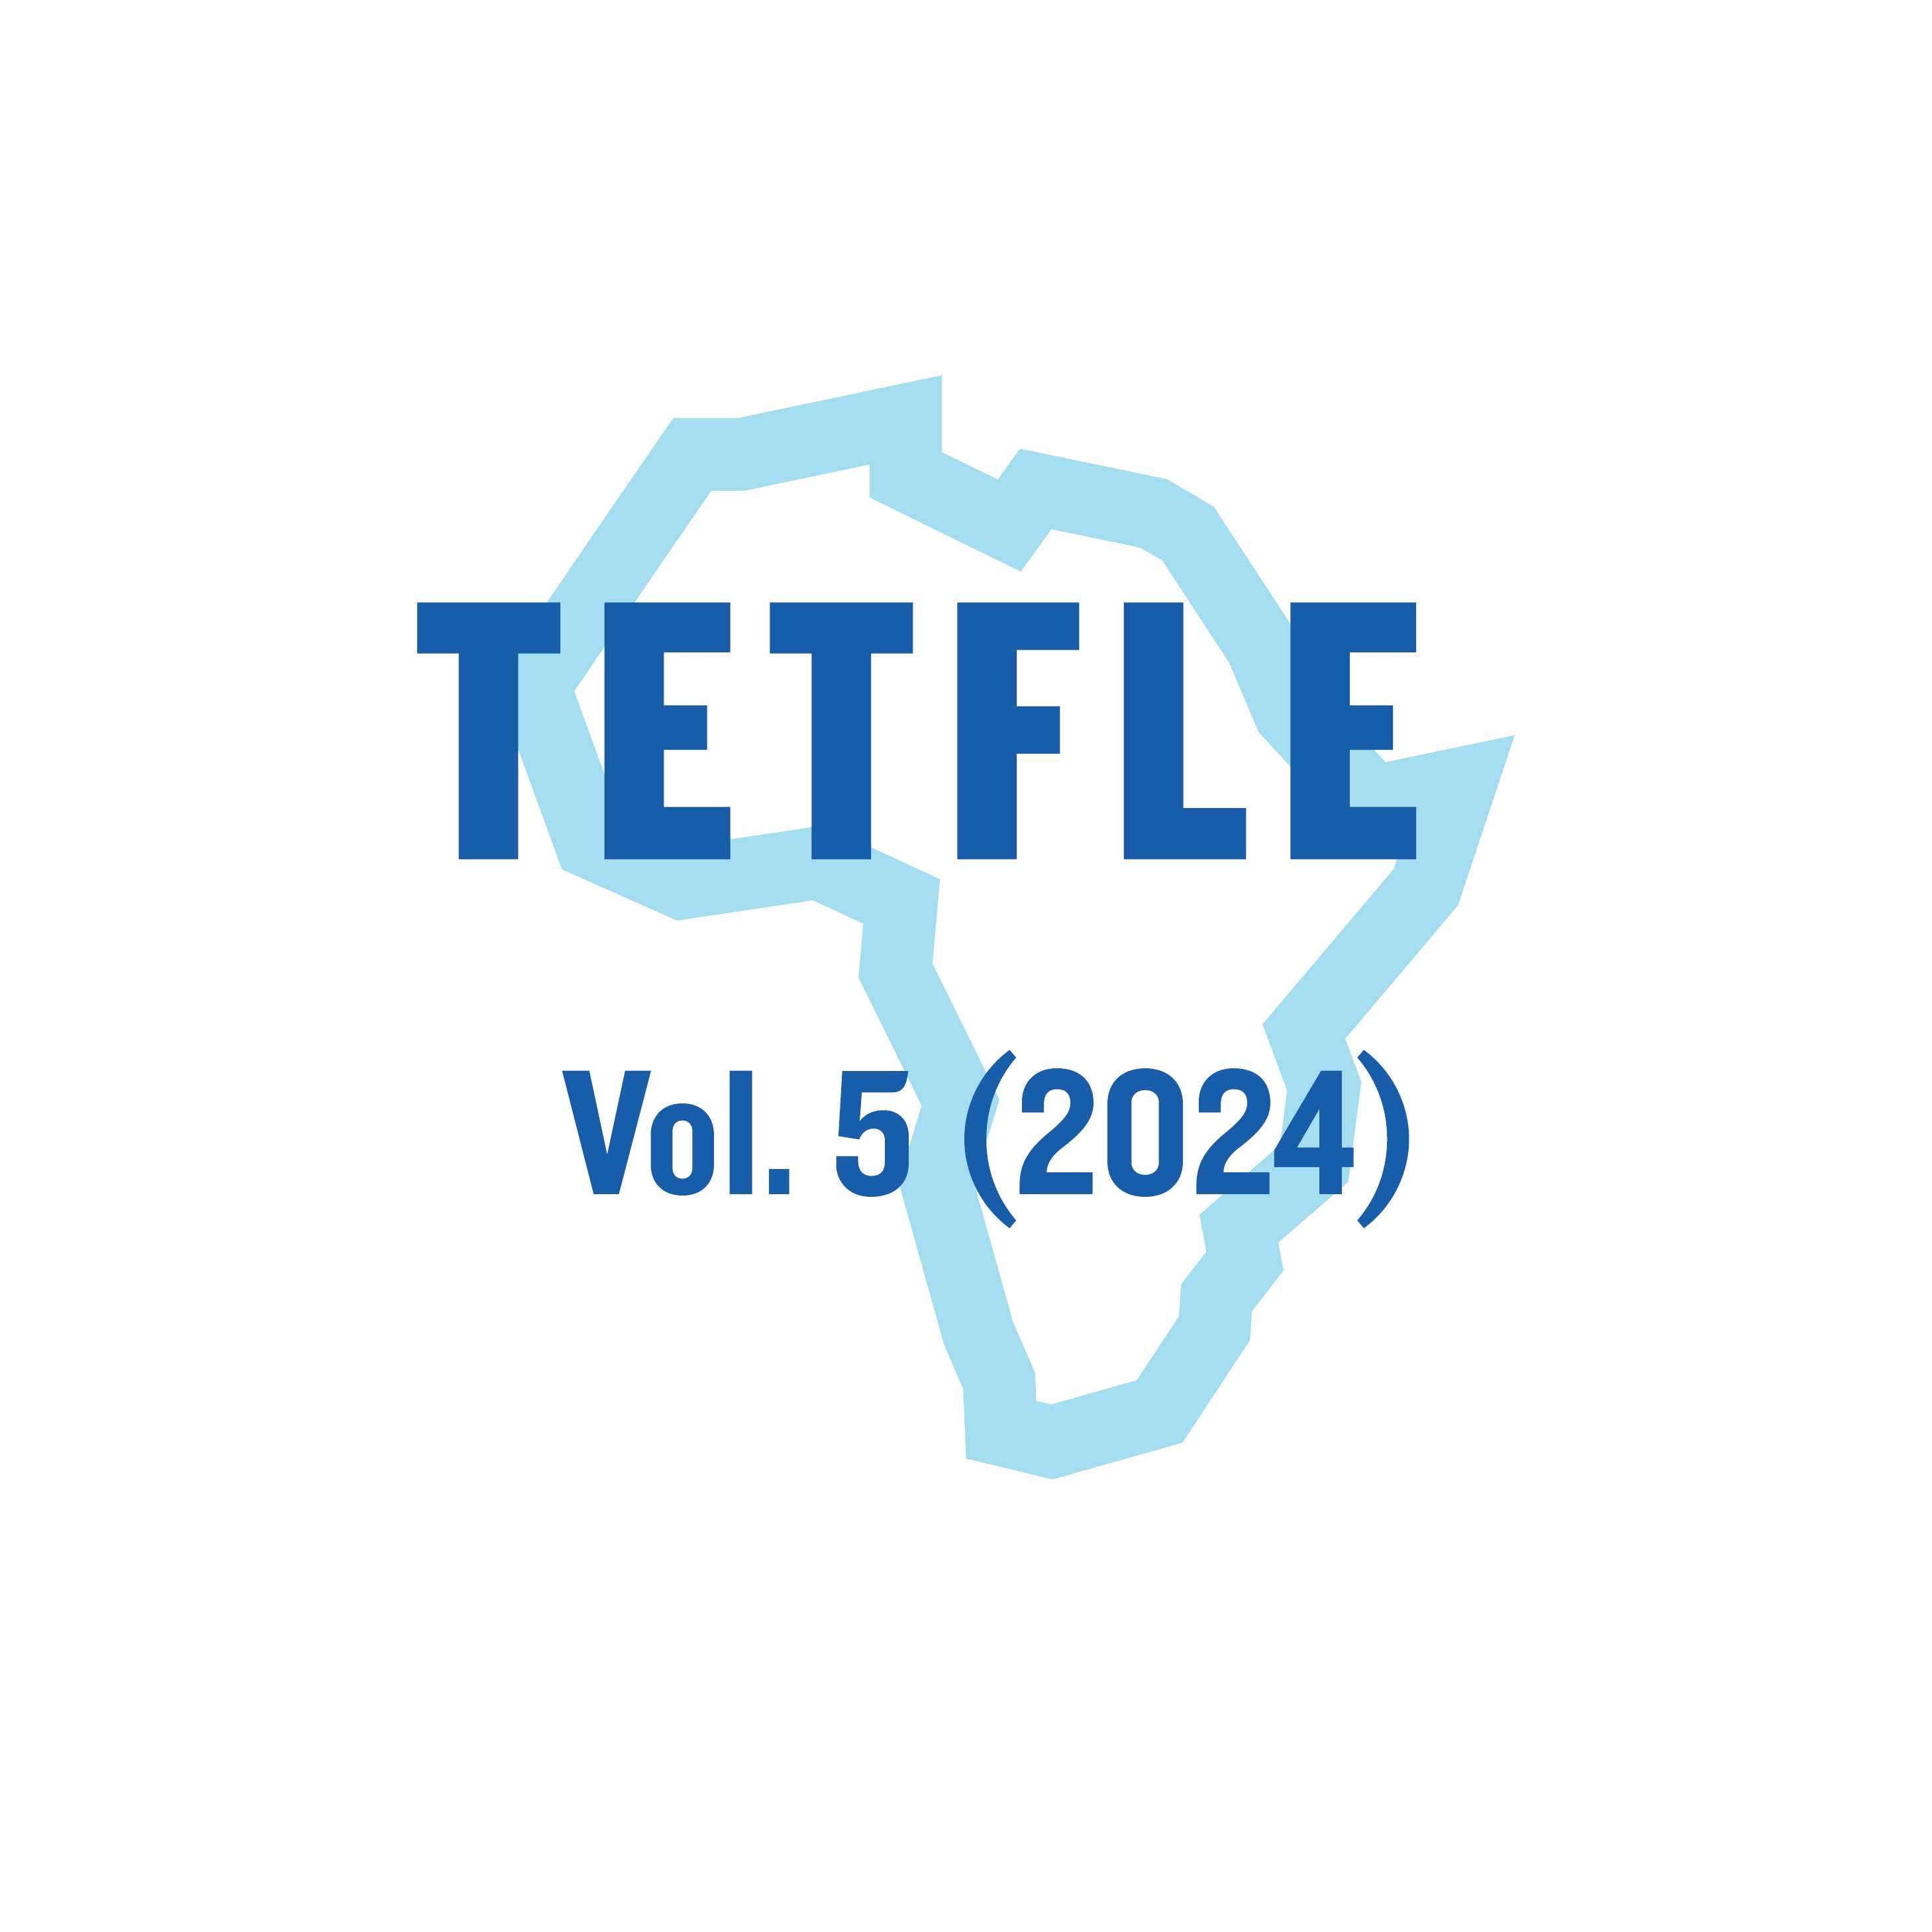 					View Vol. 5 (2024): Teacher Education through Flexible Learning in Africa
				